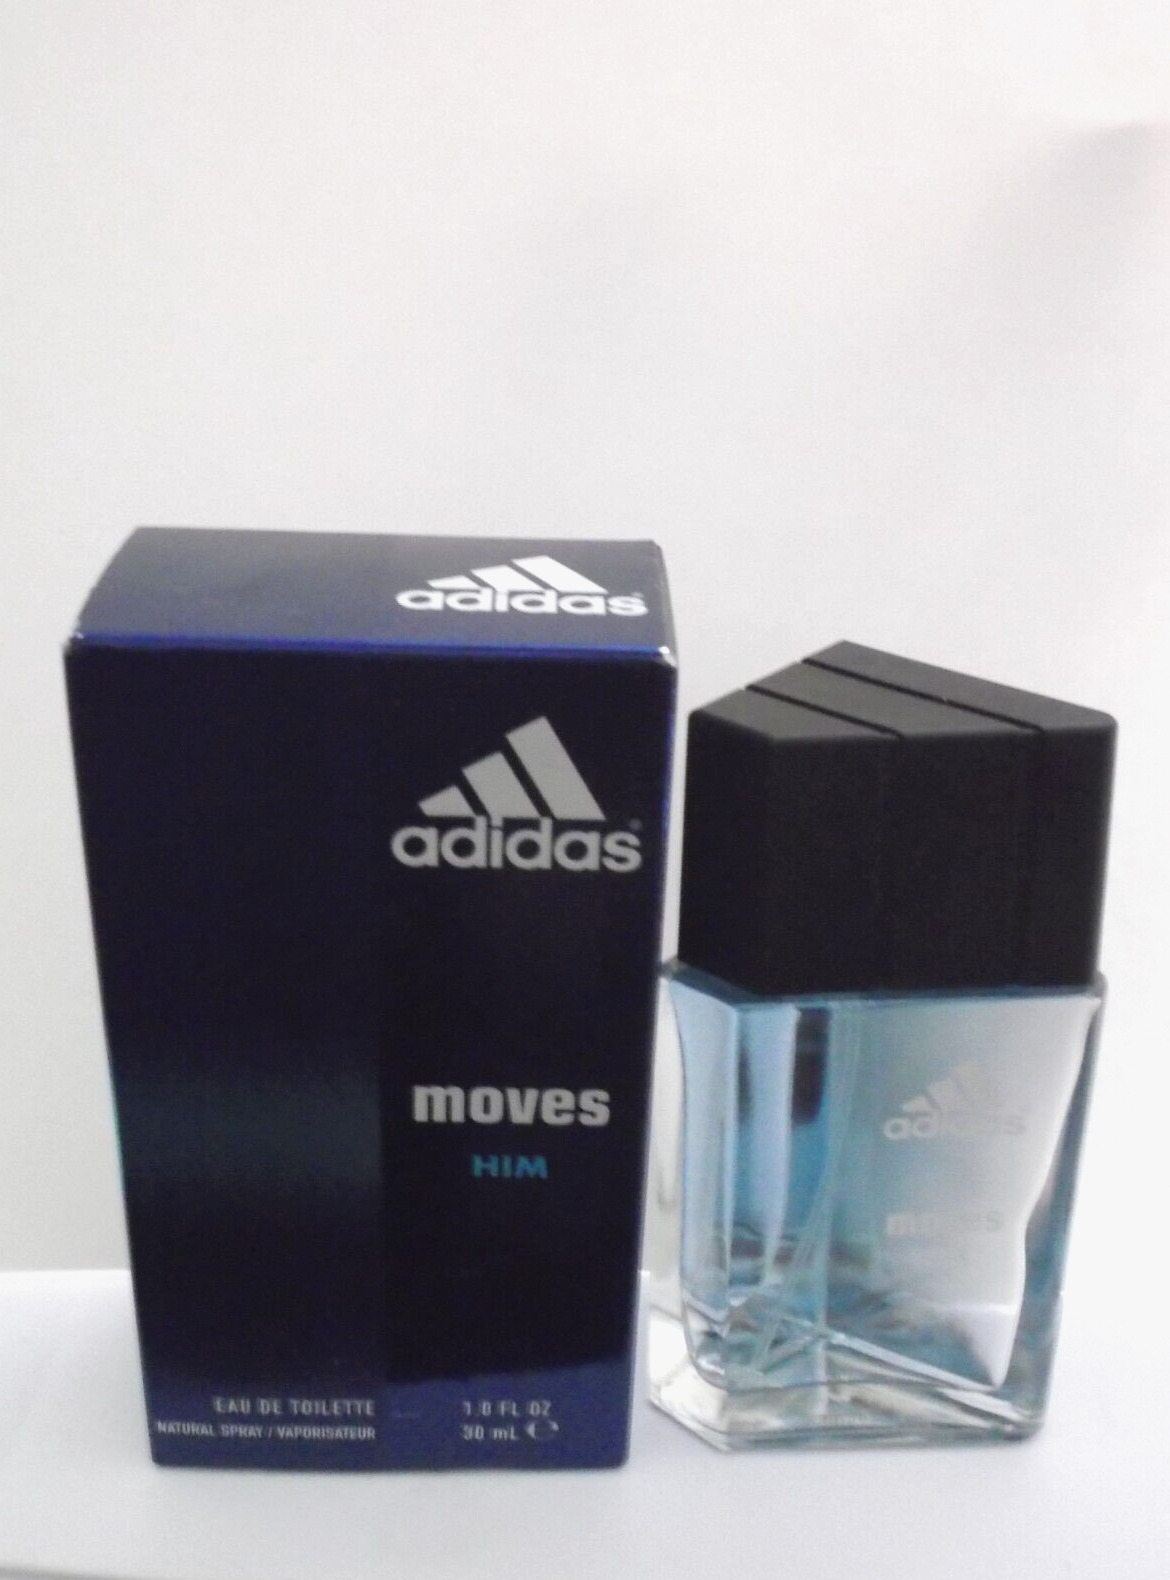 Adidas Moves for Him 1.0 oz EDT Spray New in Box